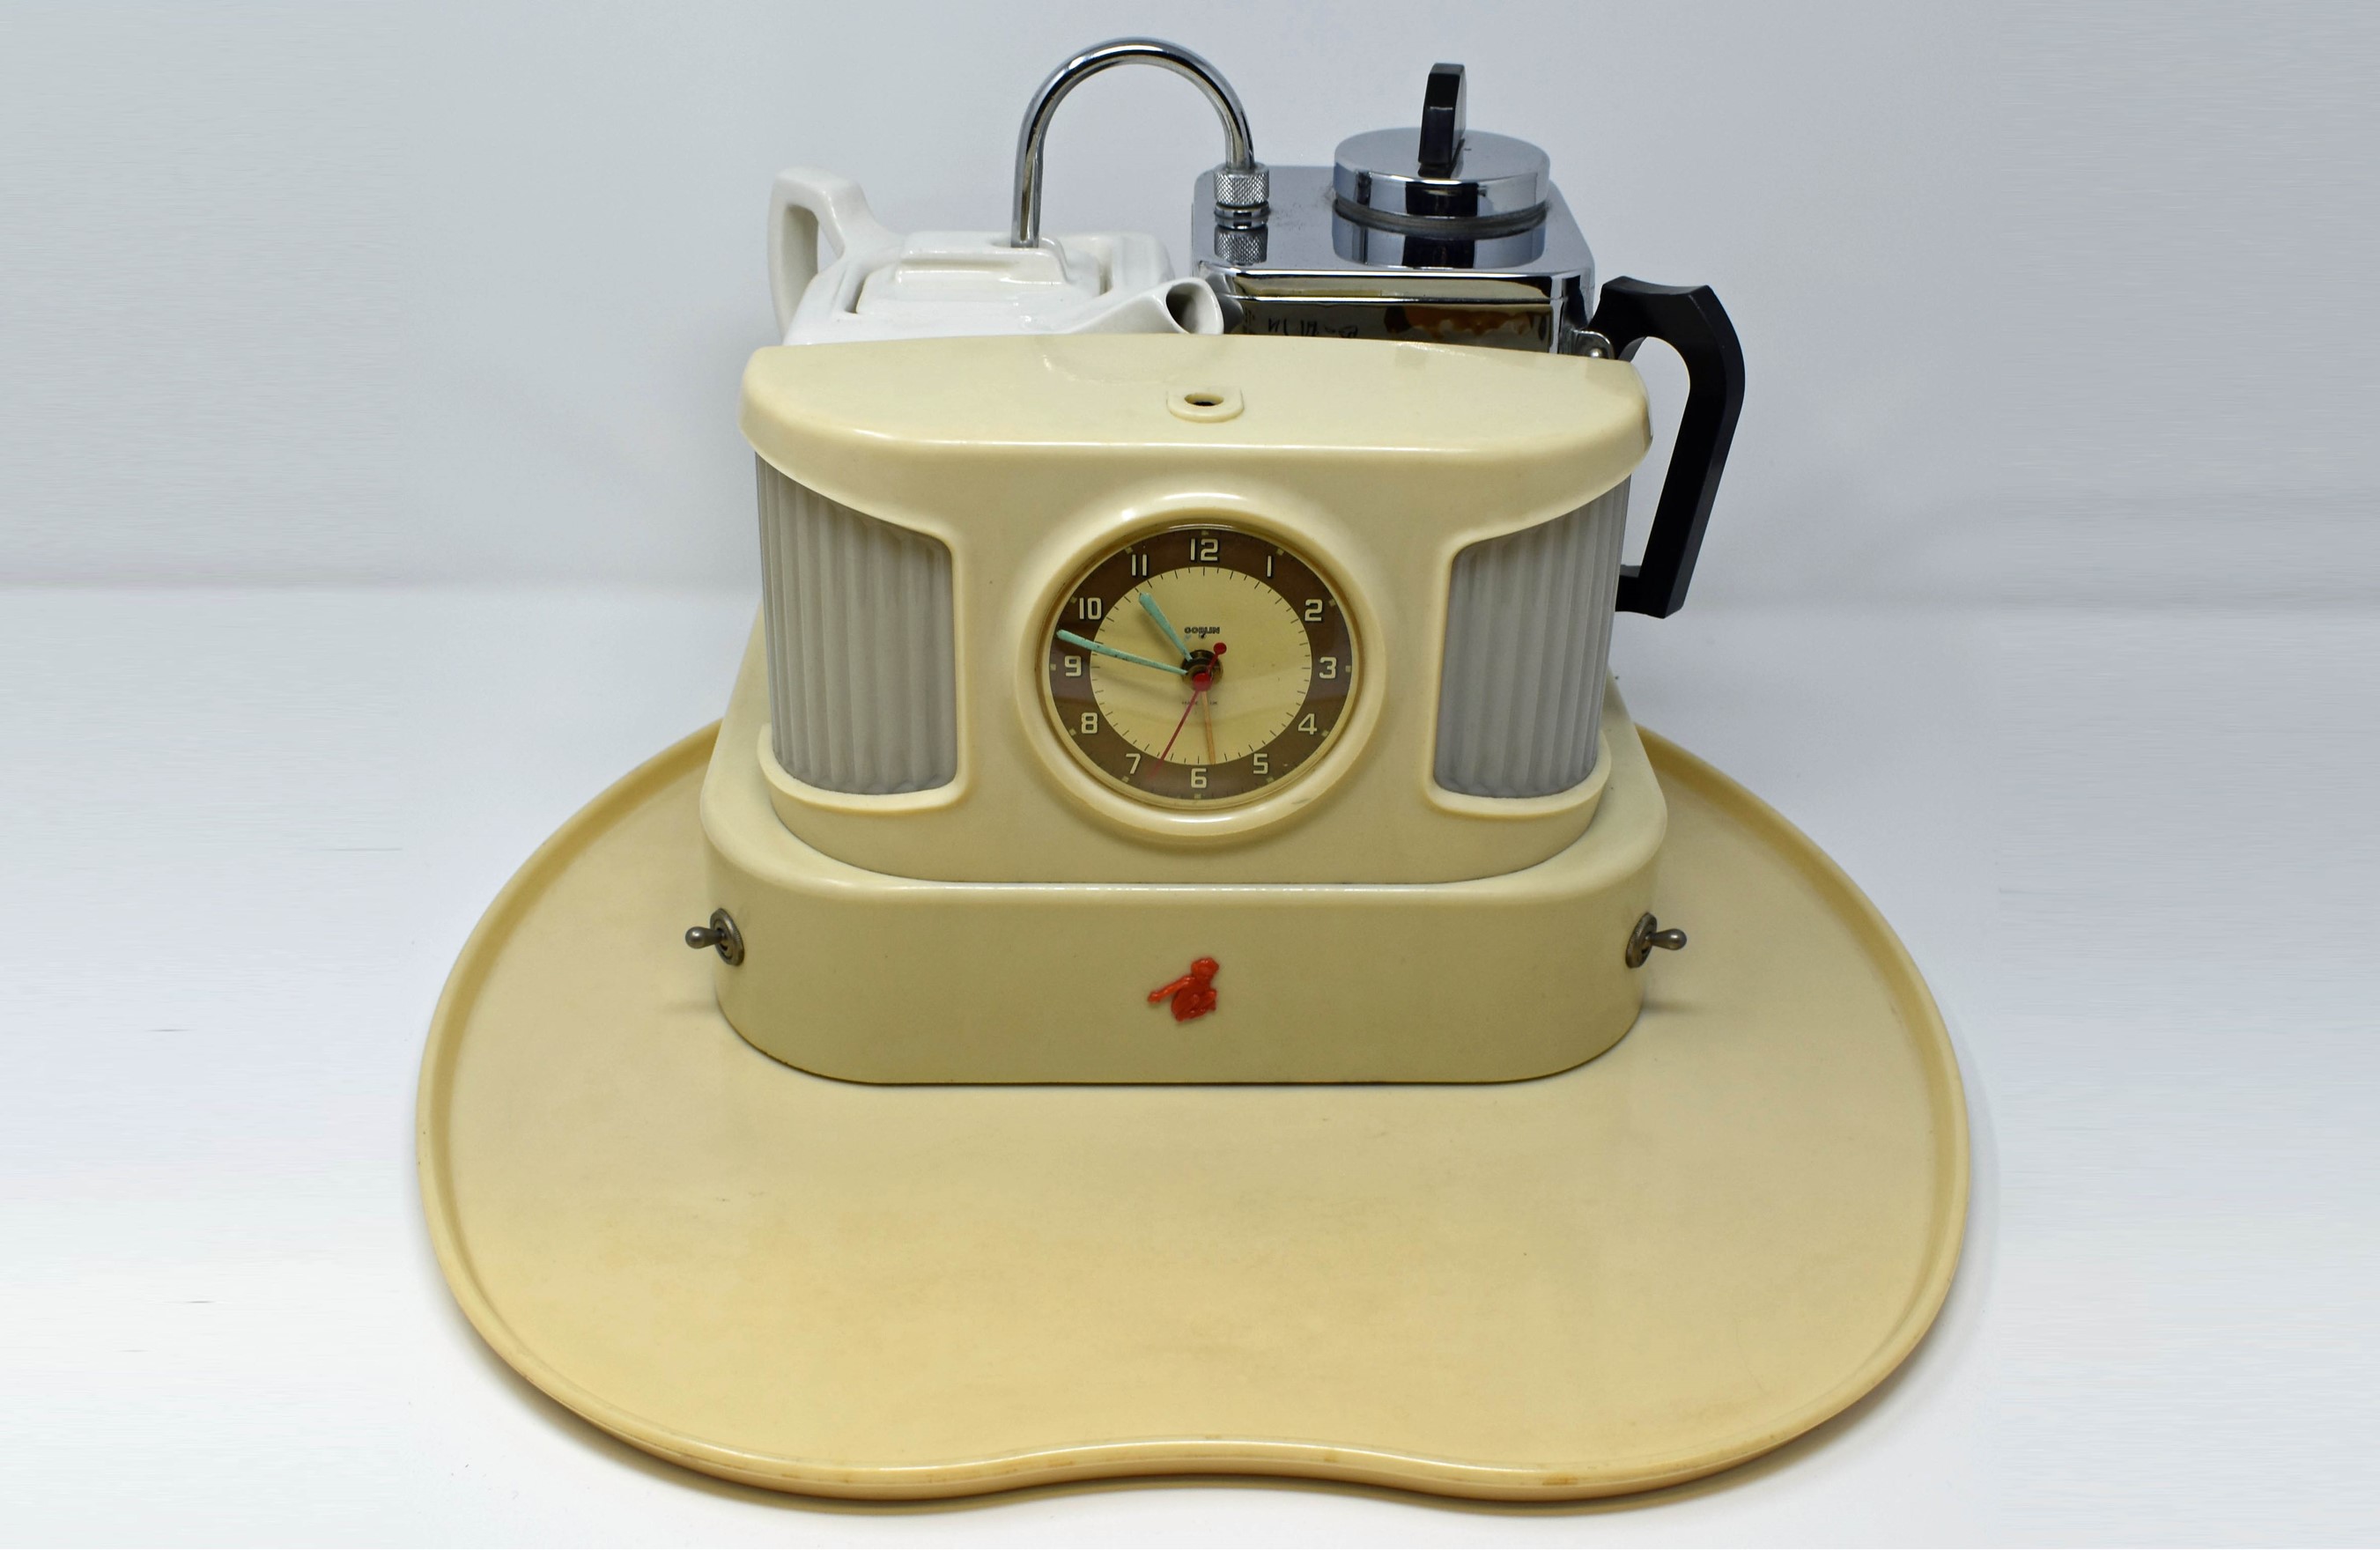 Teasmade, made in 1960s by Goblin Ltd